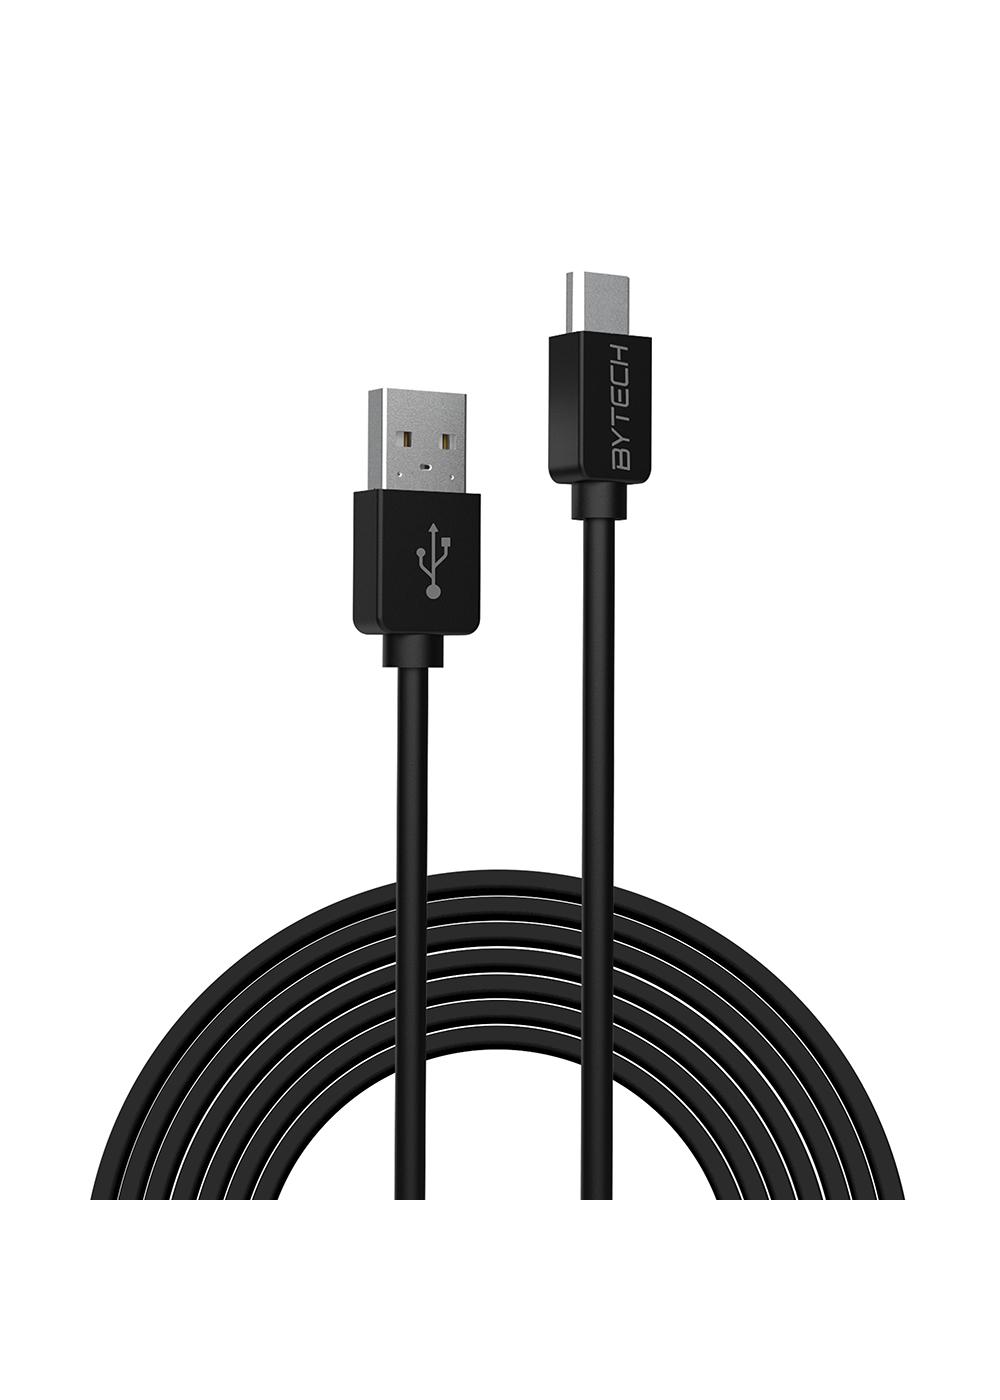 Bytech USB Type-C Charging Cable - Black; image 3 of 3